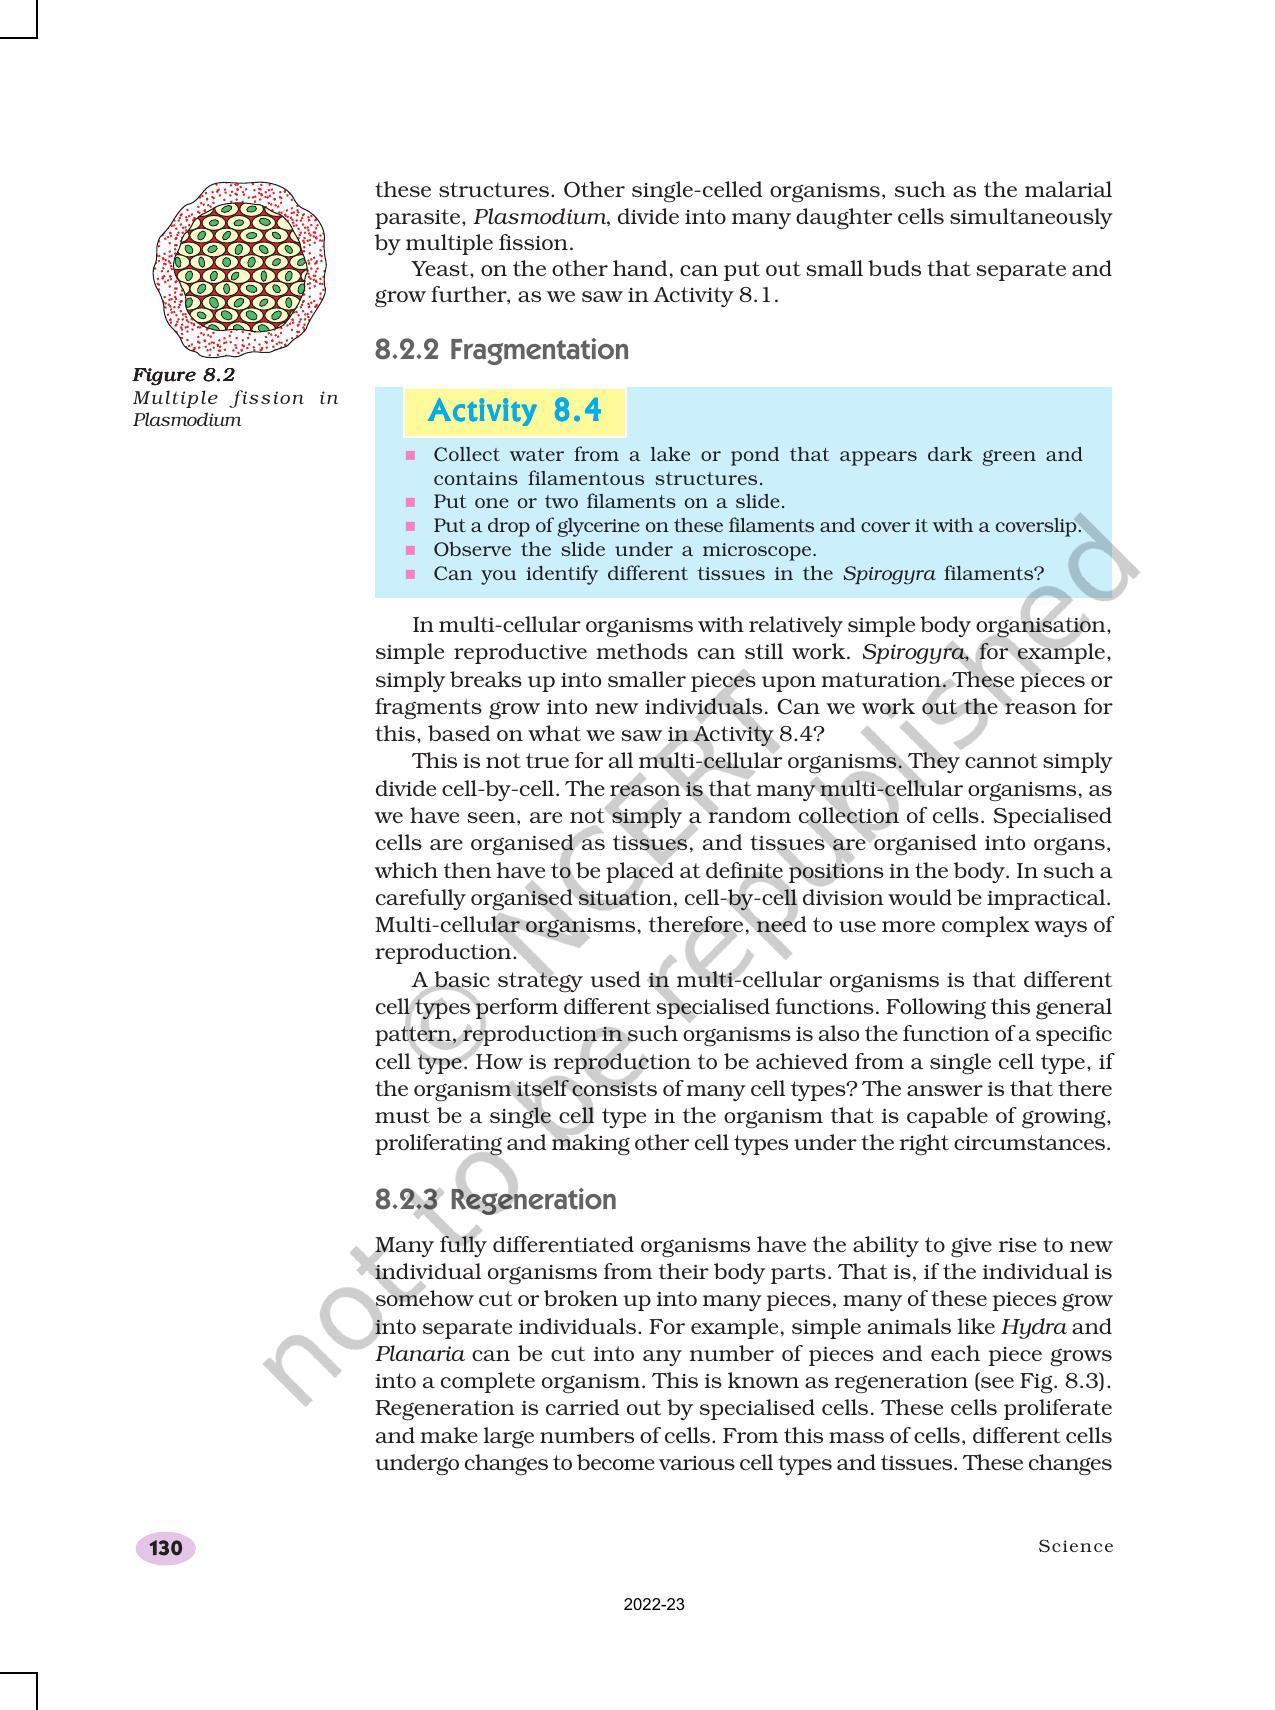 NCERT Book for Class 10 Science Chapter 8 How do Organisms Reproduce? - Page 4